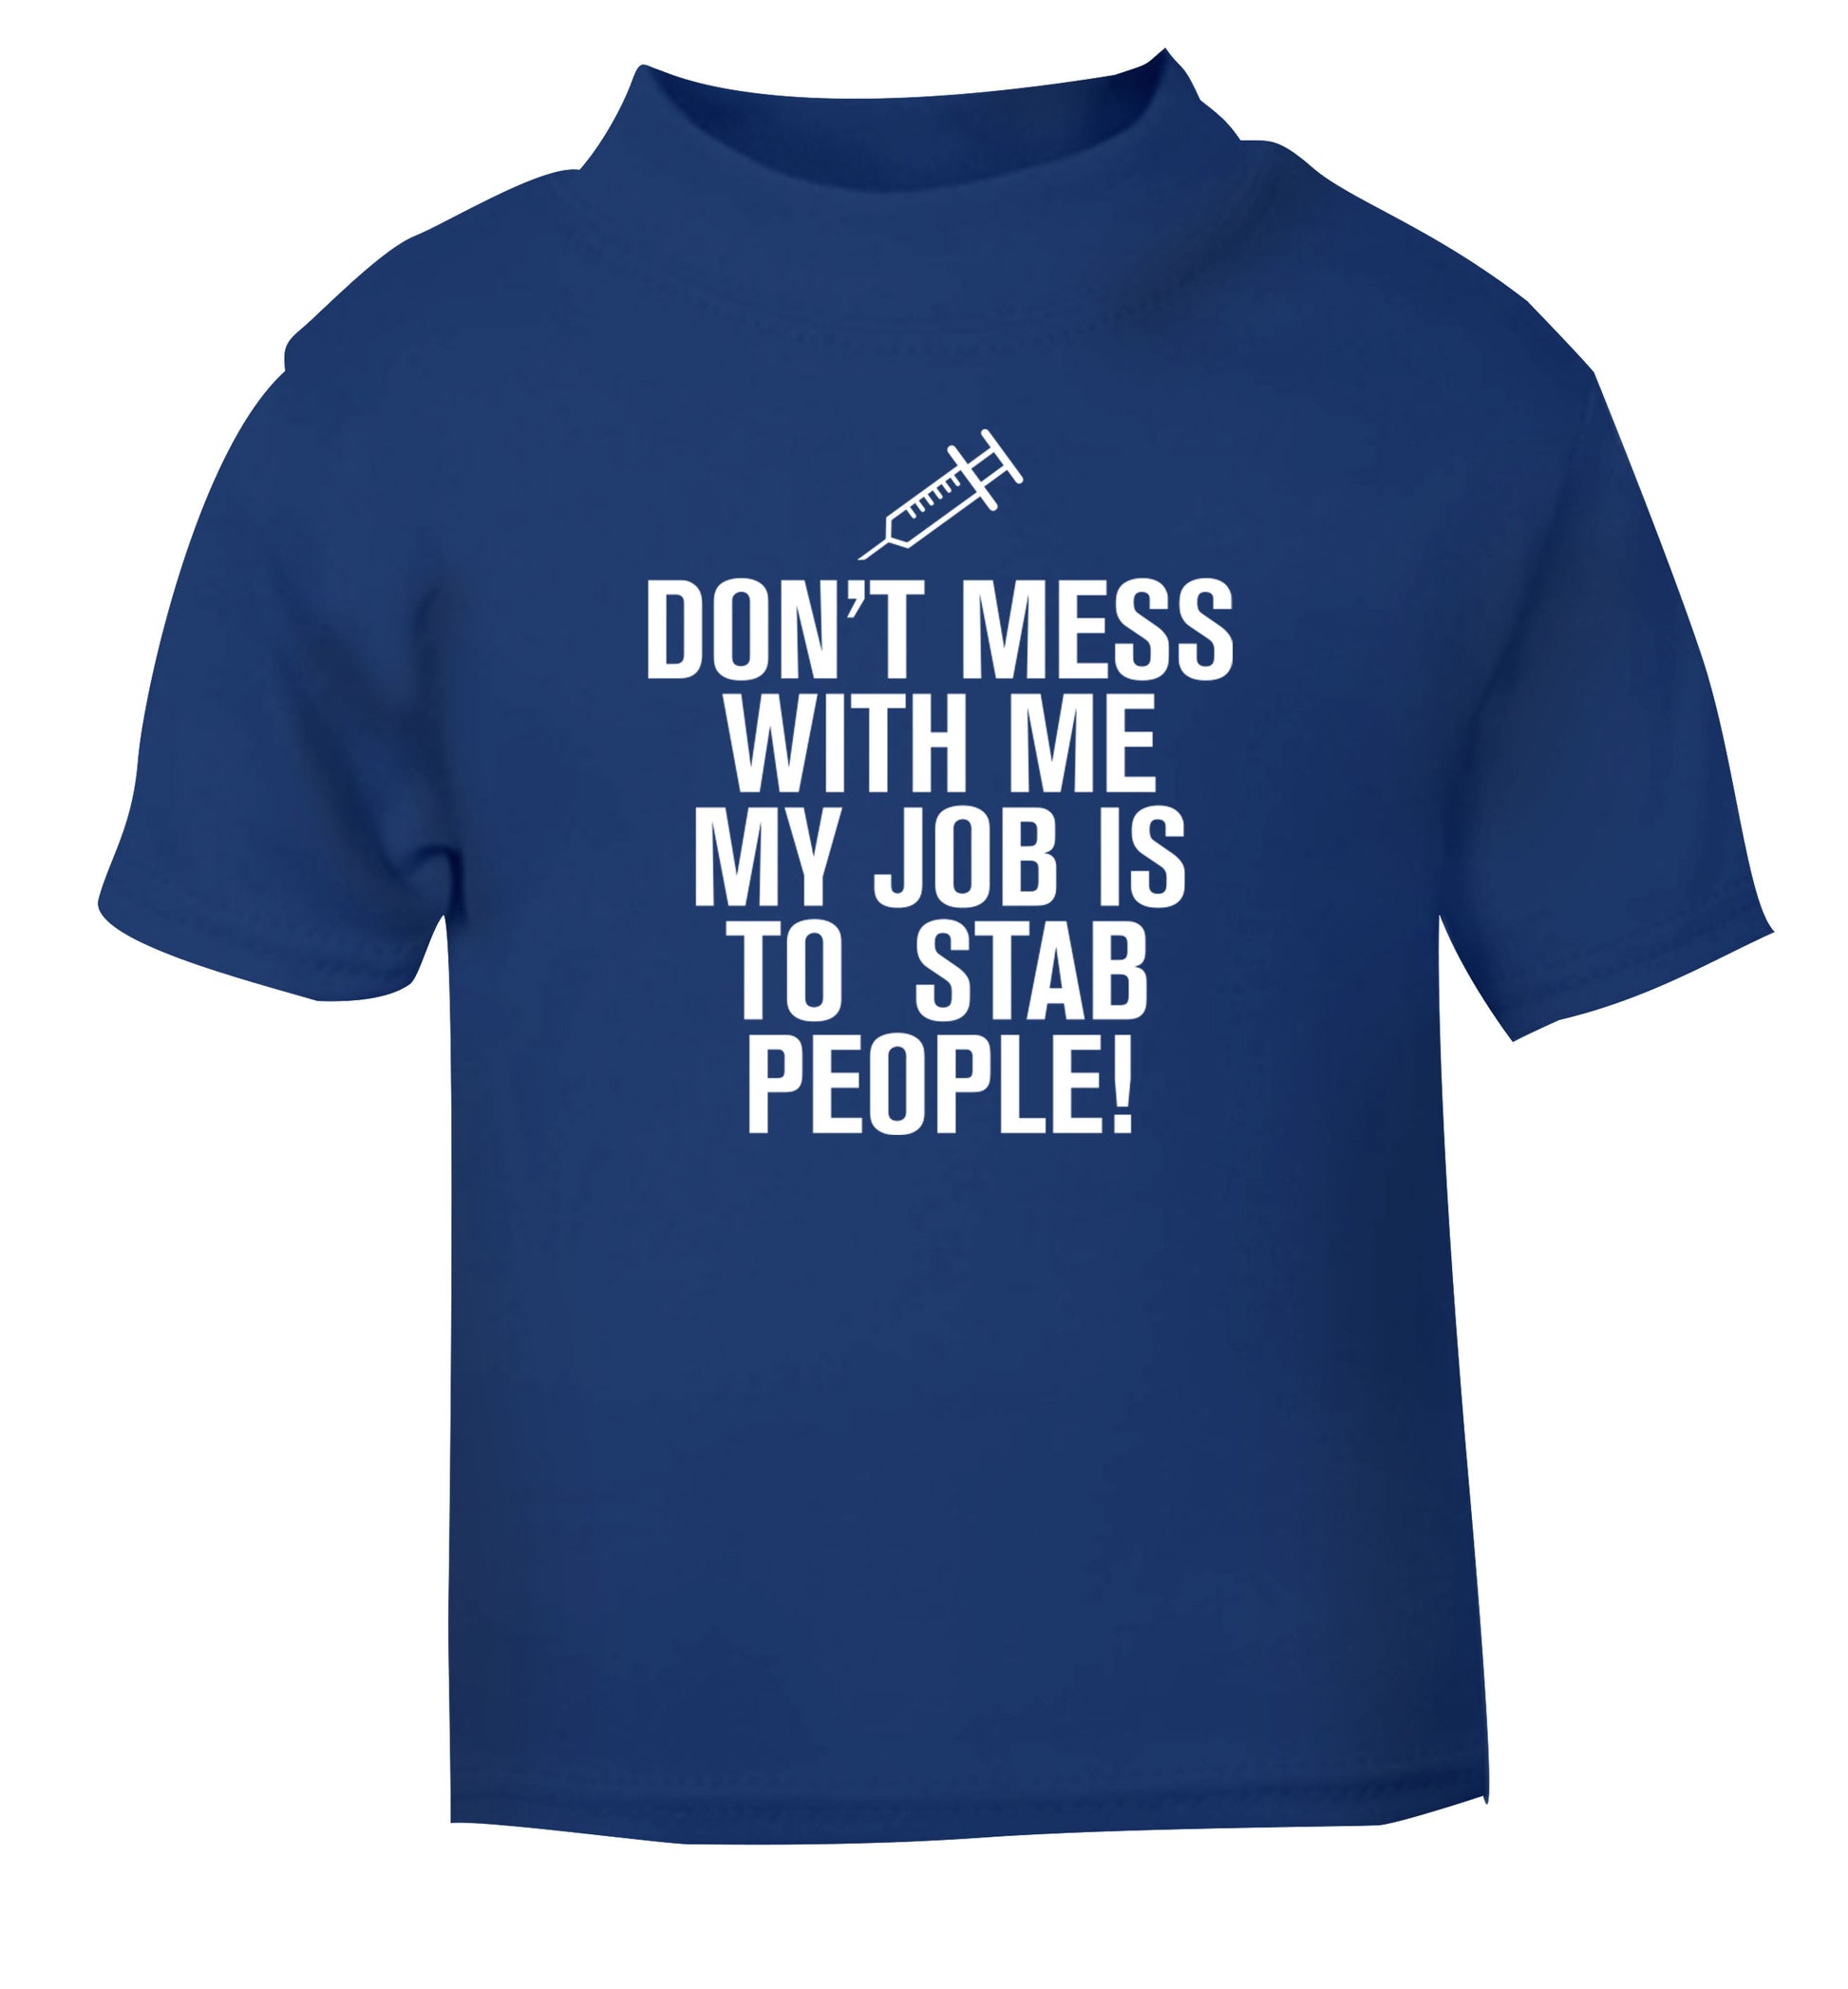 Don't mess with me my job is to stab people! blue Baby Toddler Tshirt 2 Years